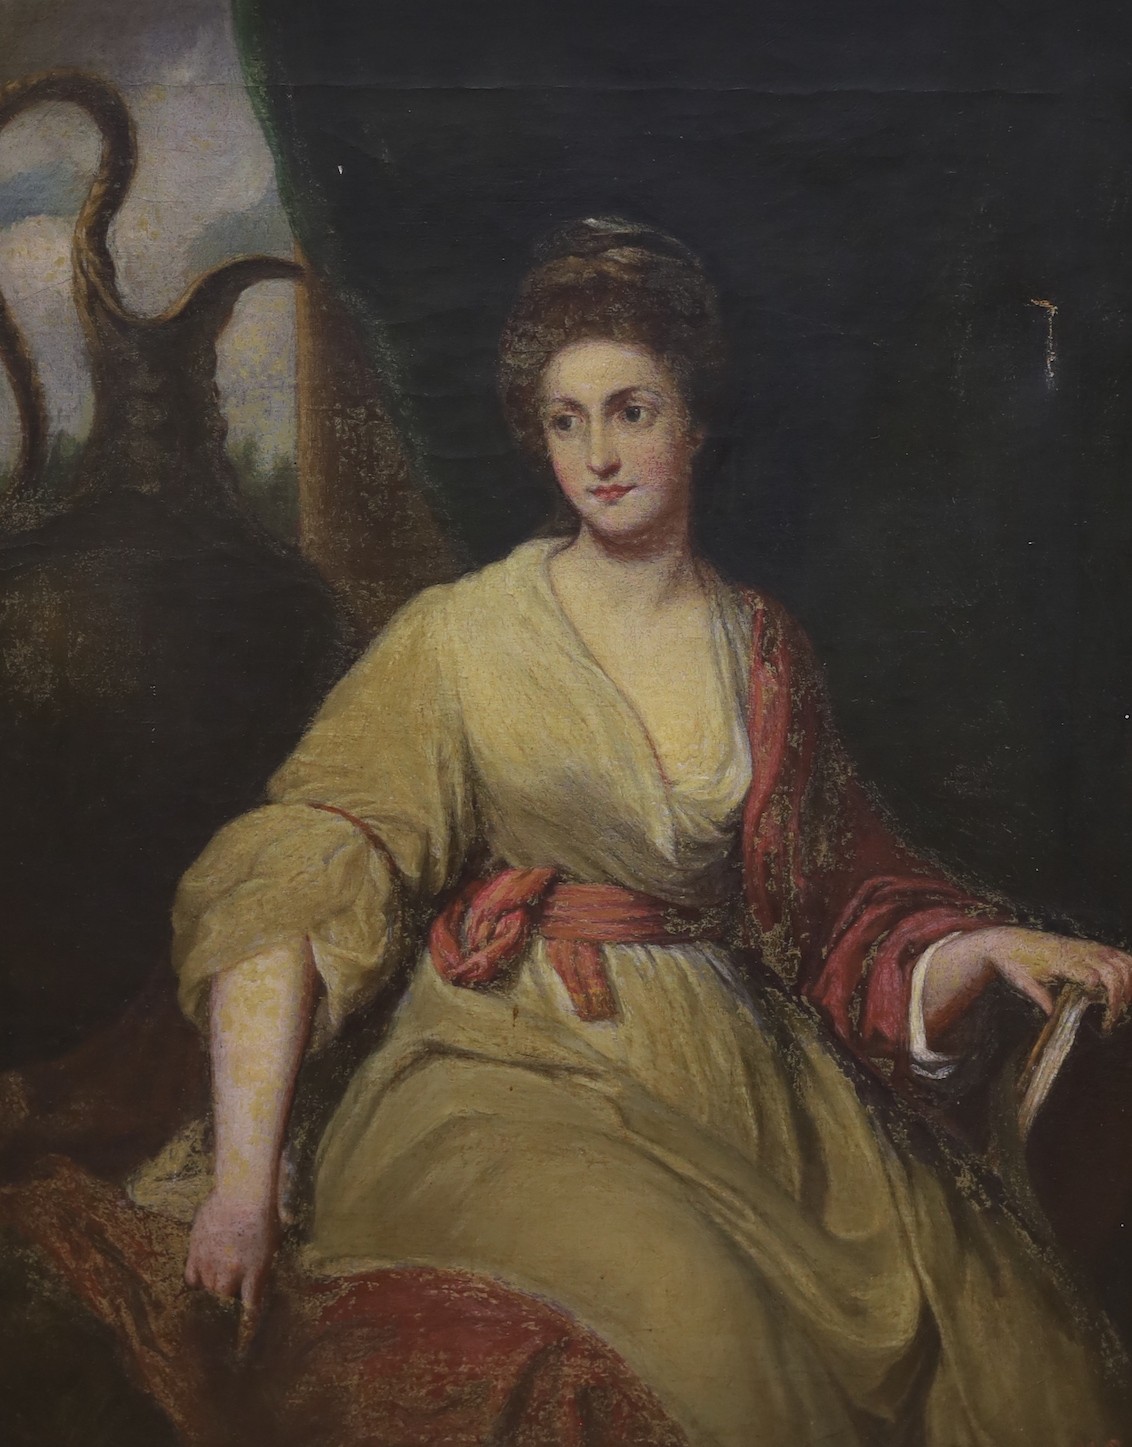 After Reynolds, 19th century oil on canvas, Portrait of Lady Diana Beauclerk, 55 x 43cm